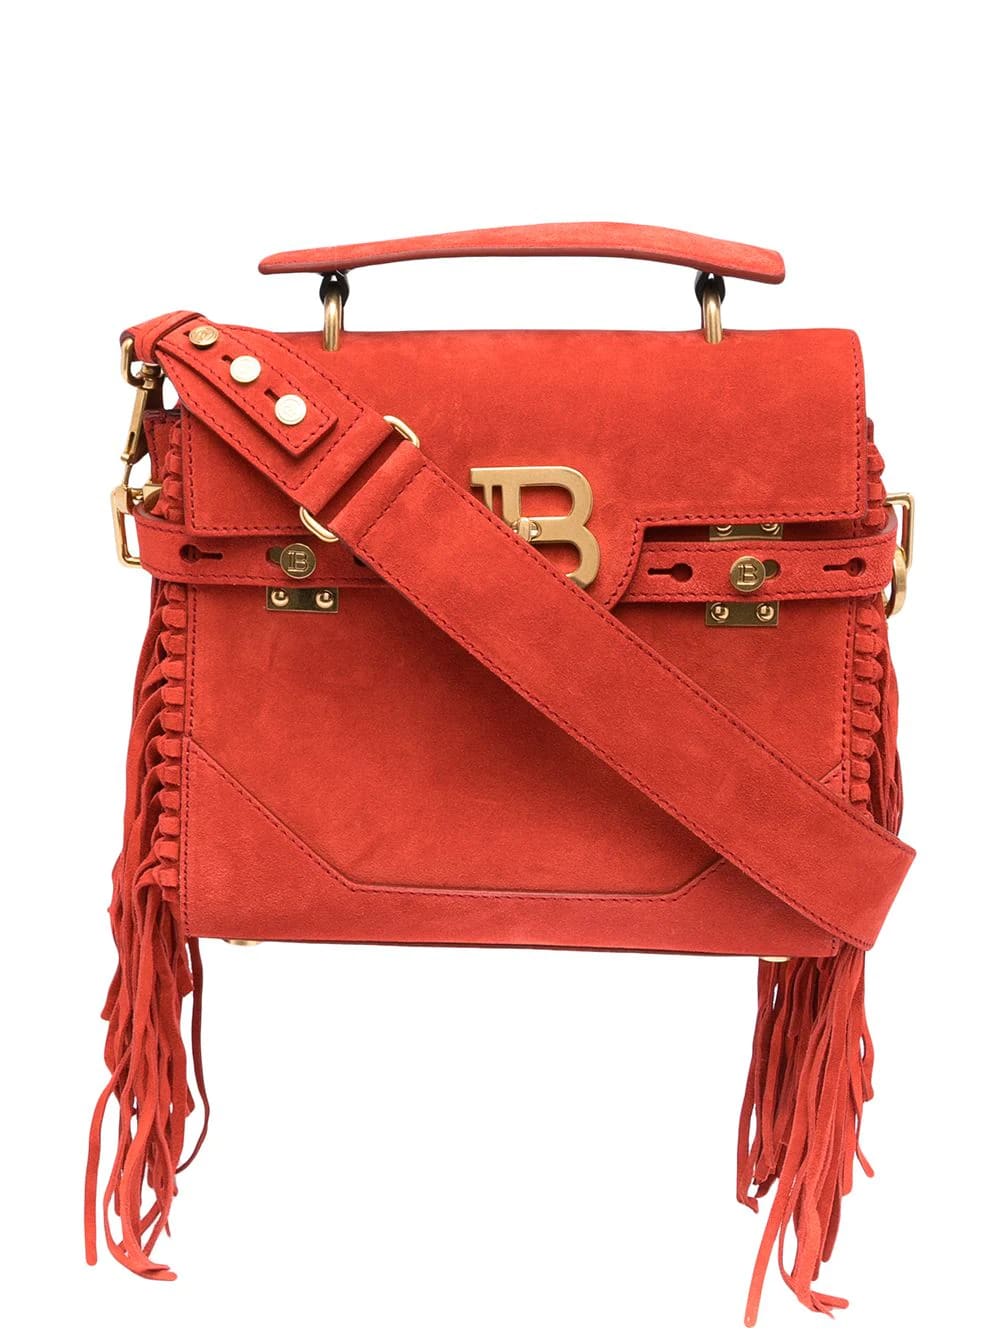 BALMAIN B-BUZZ 23 BAG IN RED SUEDE WITH FRINGES,VN0DB534LCRF 2PC